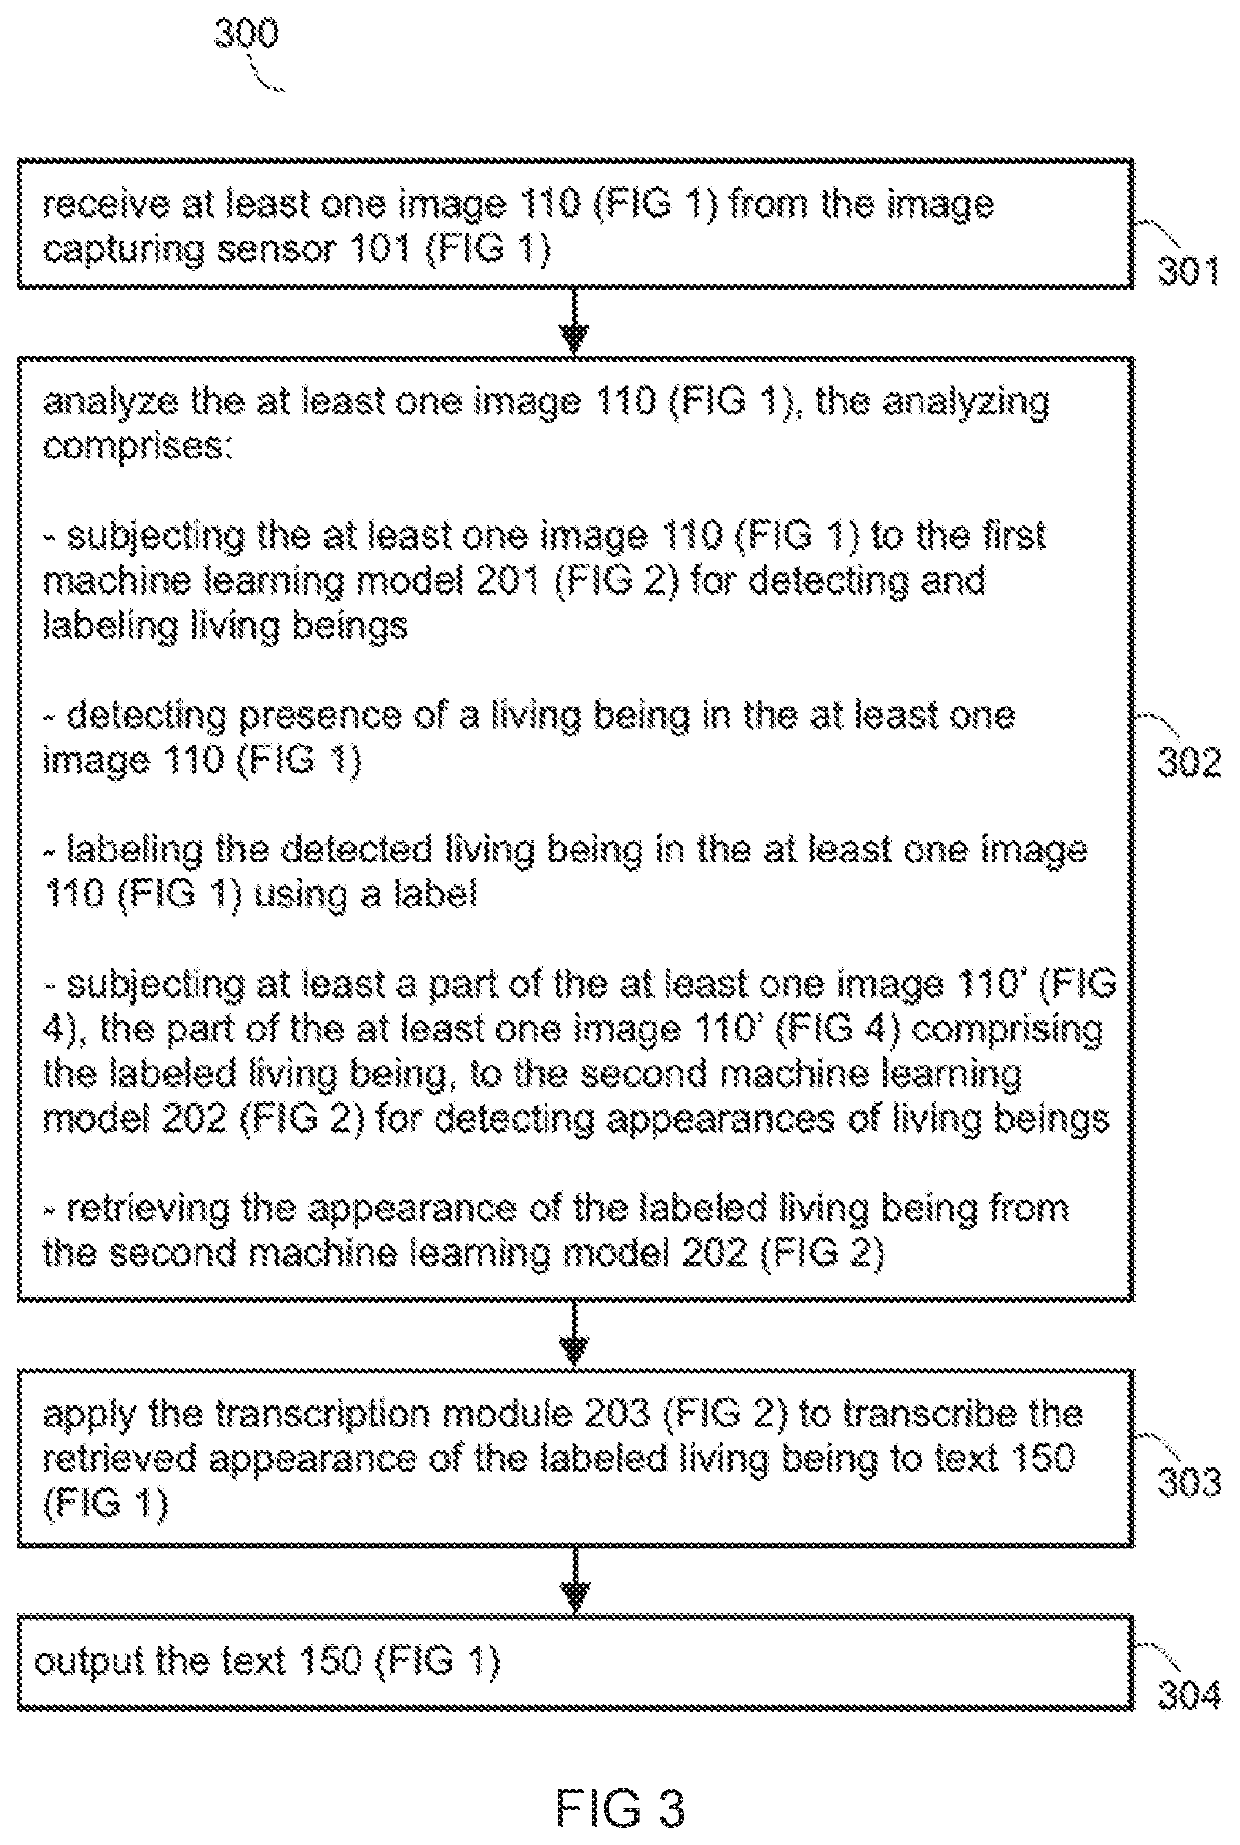 A medical device for transcription of appearances in an image to text with machine learning